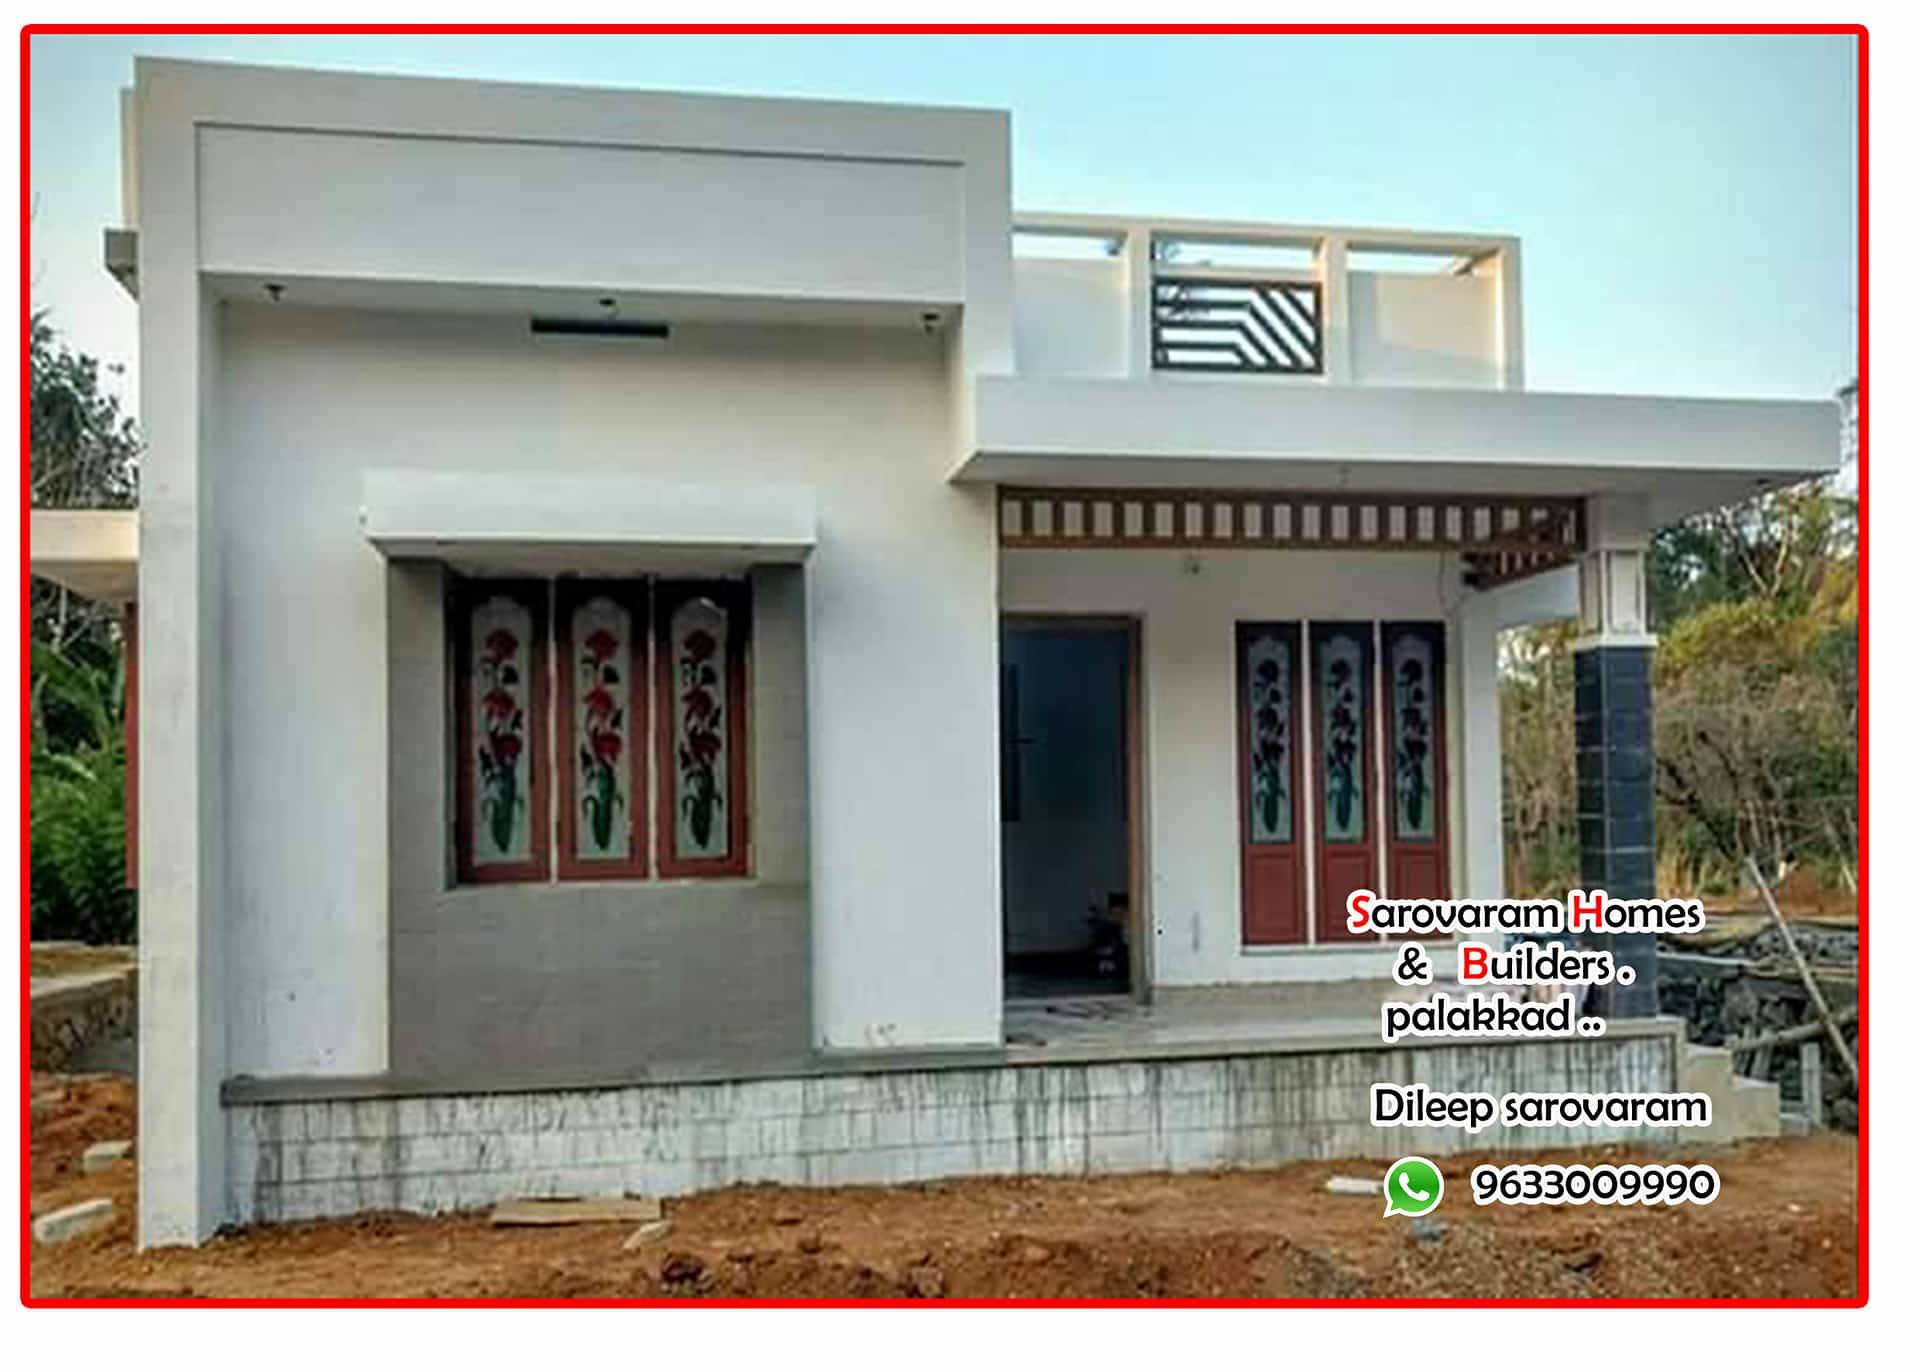 650 Square Feet 2 Bedroom Low Budget Home Deign